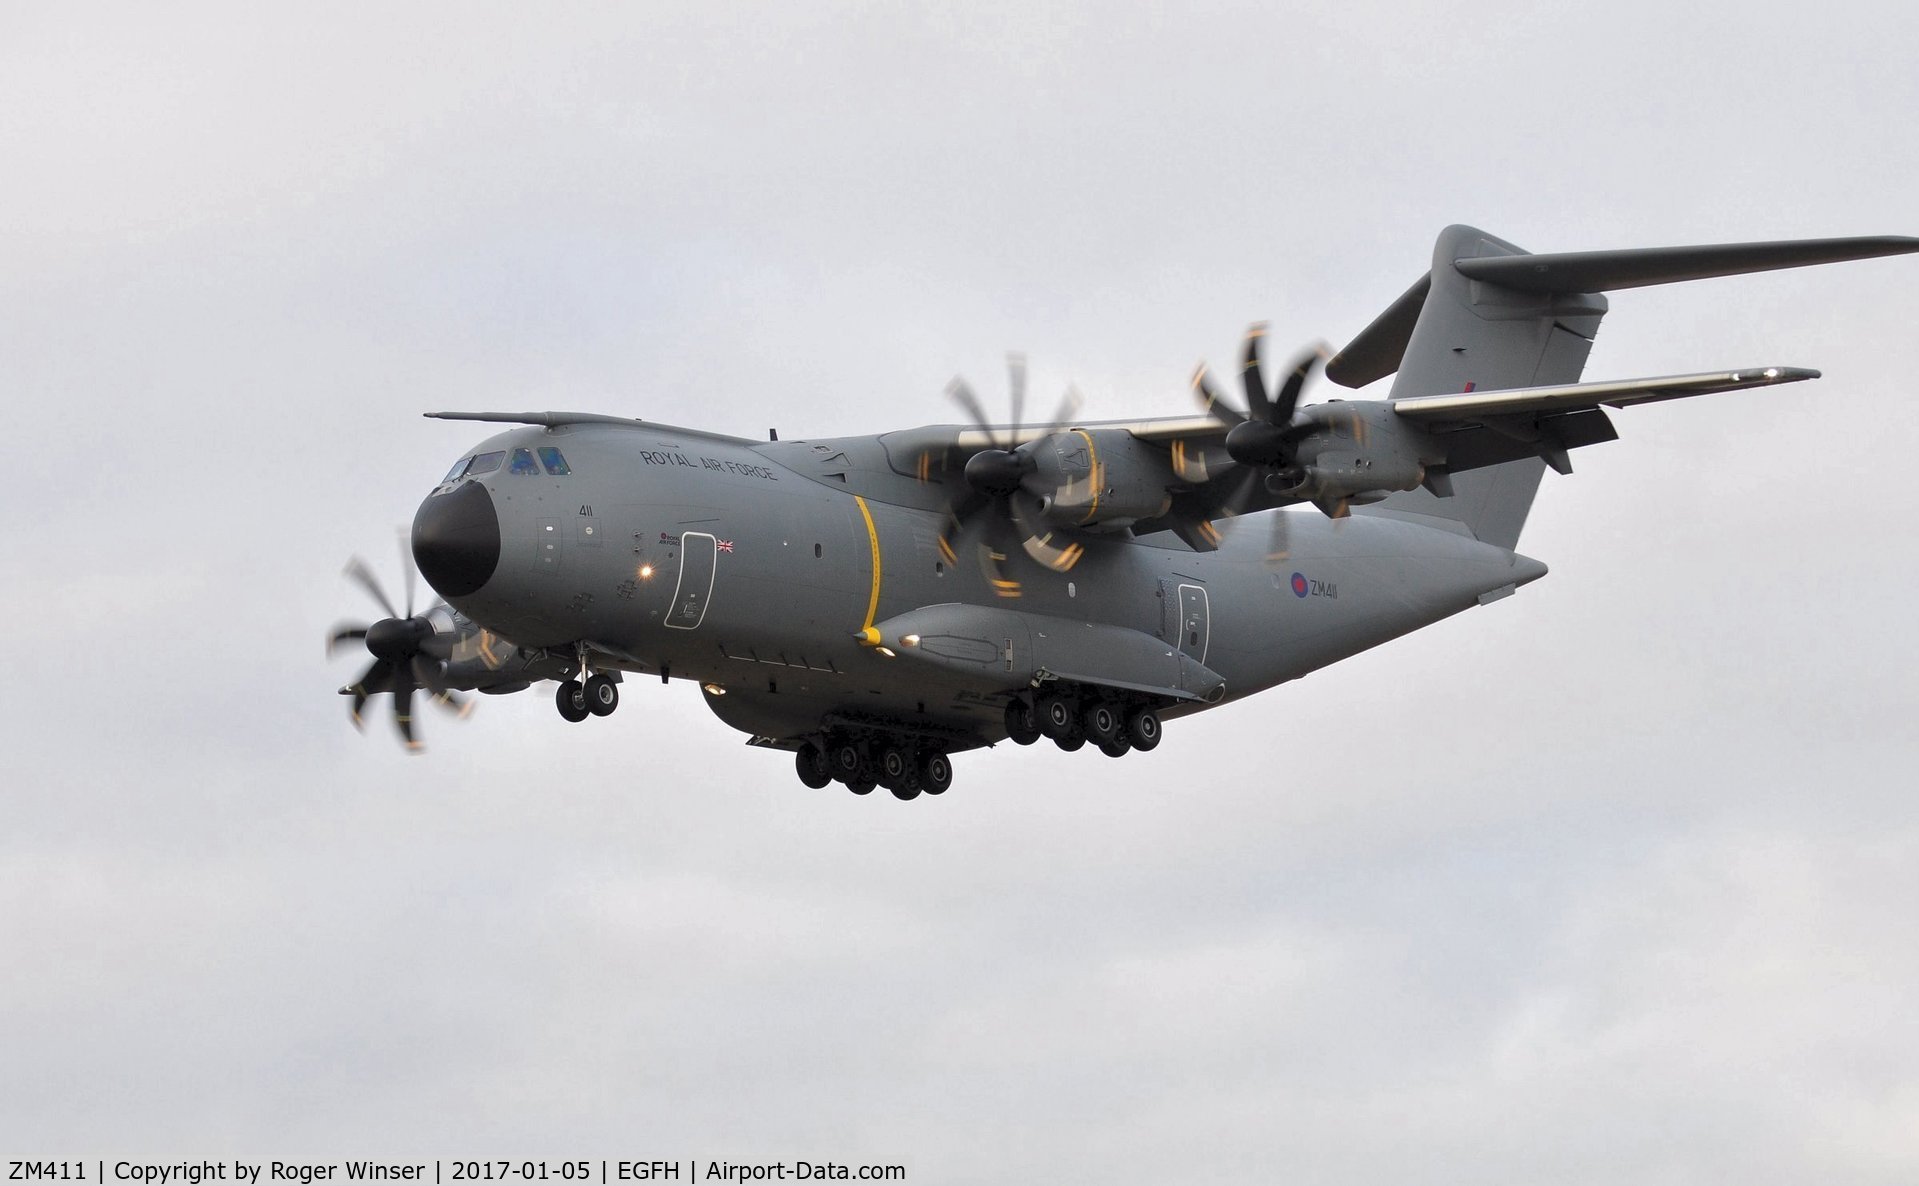 ZM411, 2016 Airbus A400M-180 Atlas C.1 C/N 039, Low pass over Runway 22 by RAF Atlas C.1 aircraft coded 411 of the Brize Norton Transport Wing.